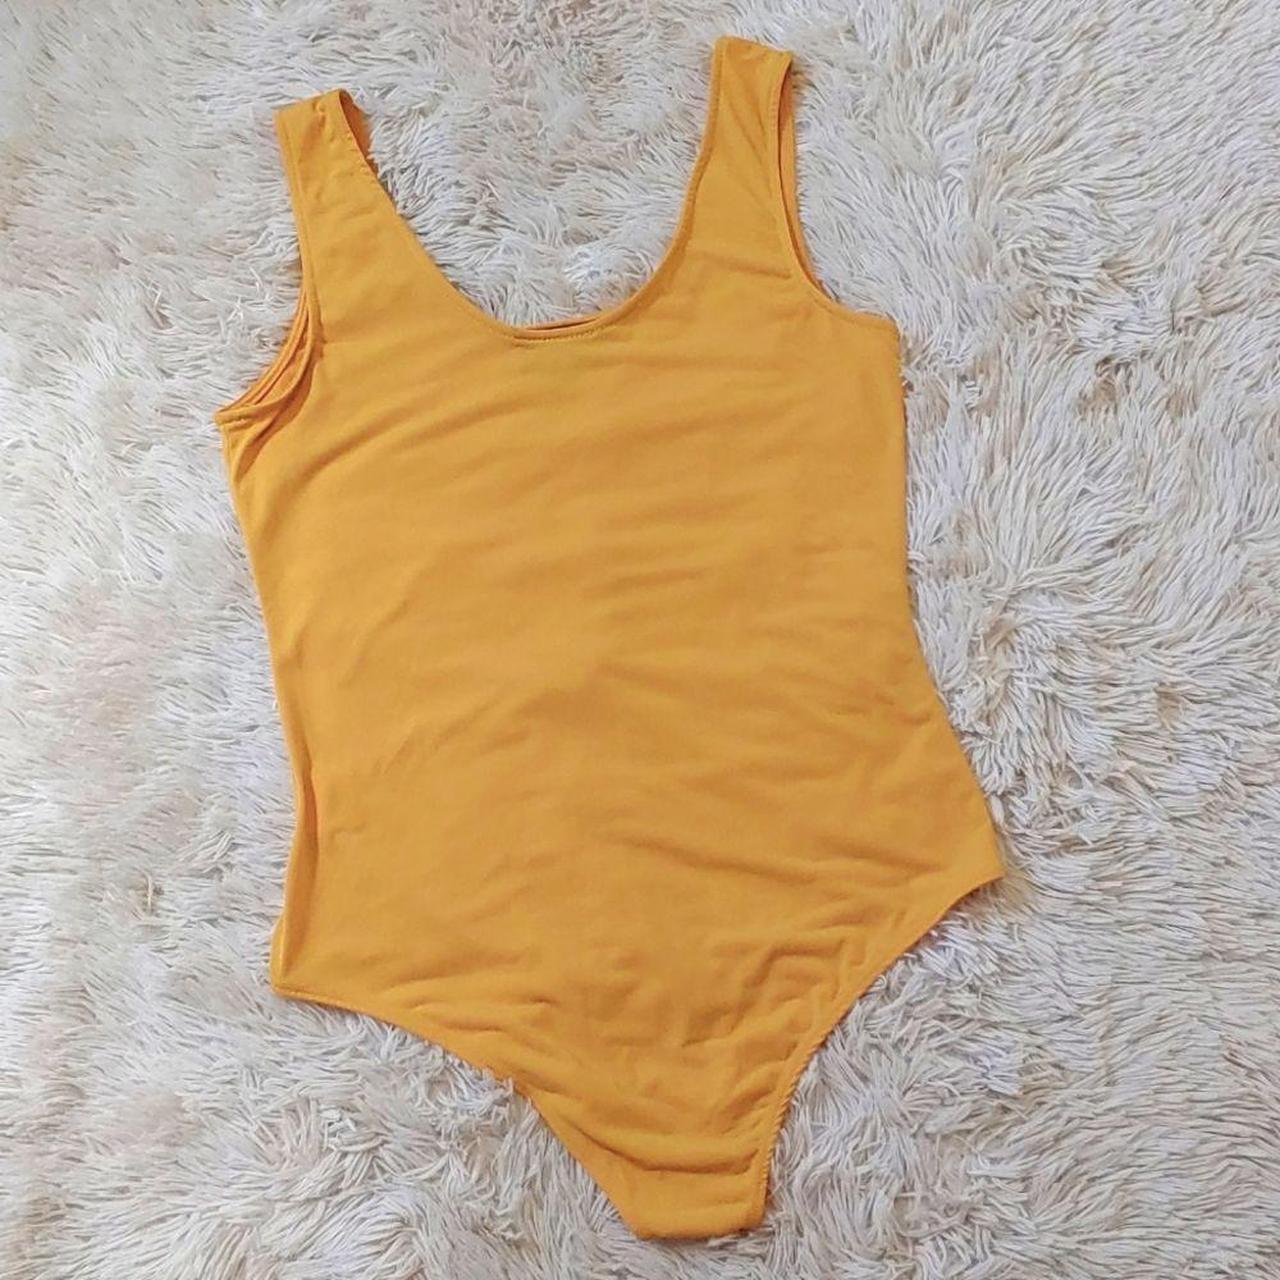 Product Image 4 - Modcloth bodysuit!

Mustard yellow.

Scoop neck front